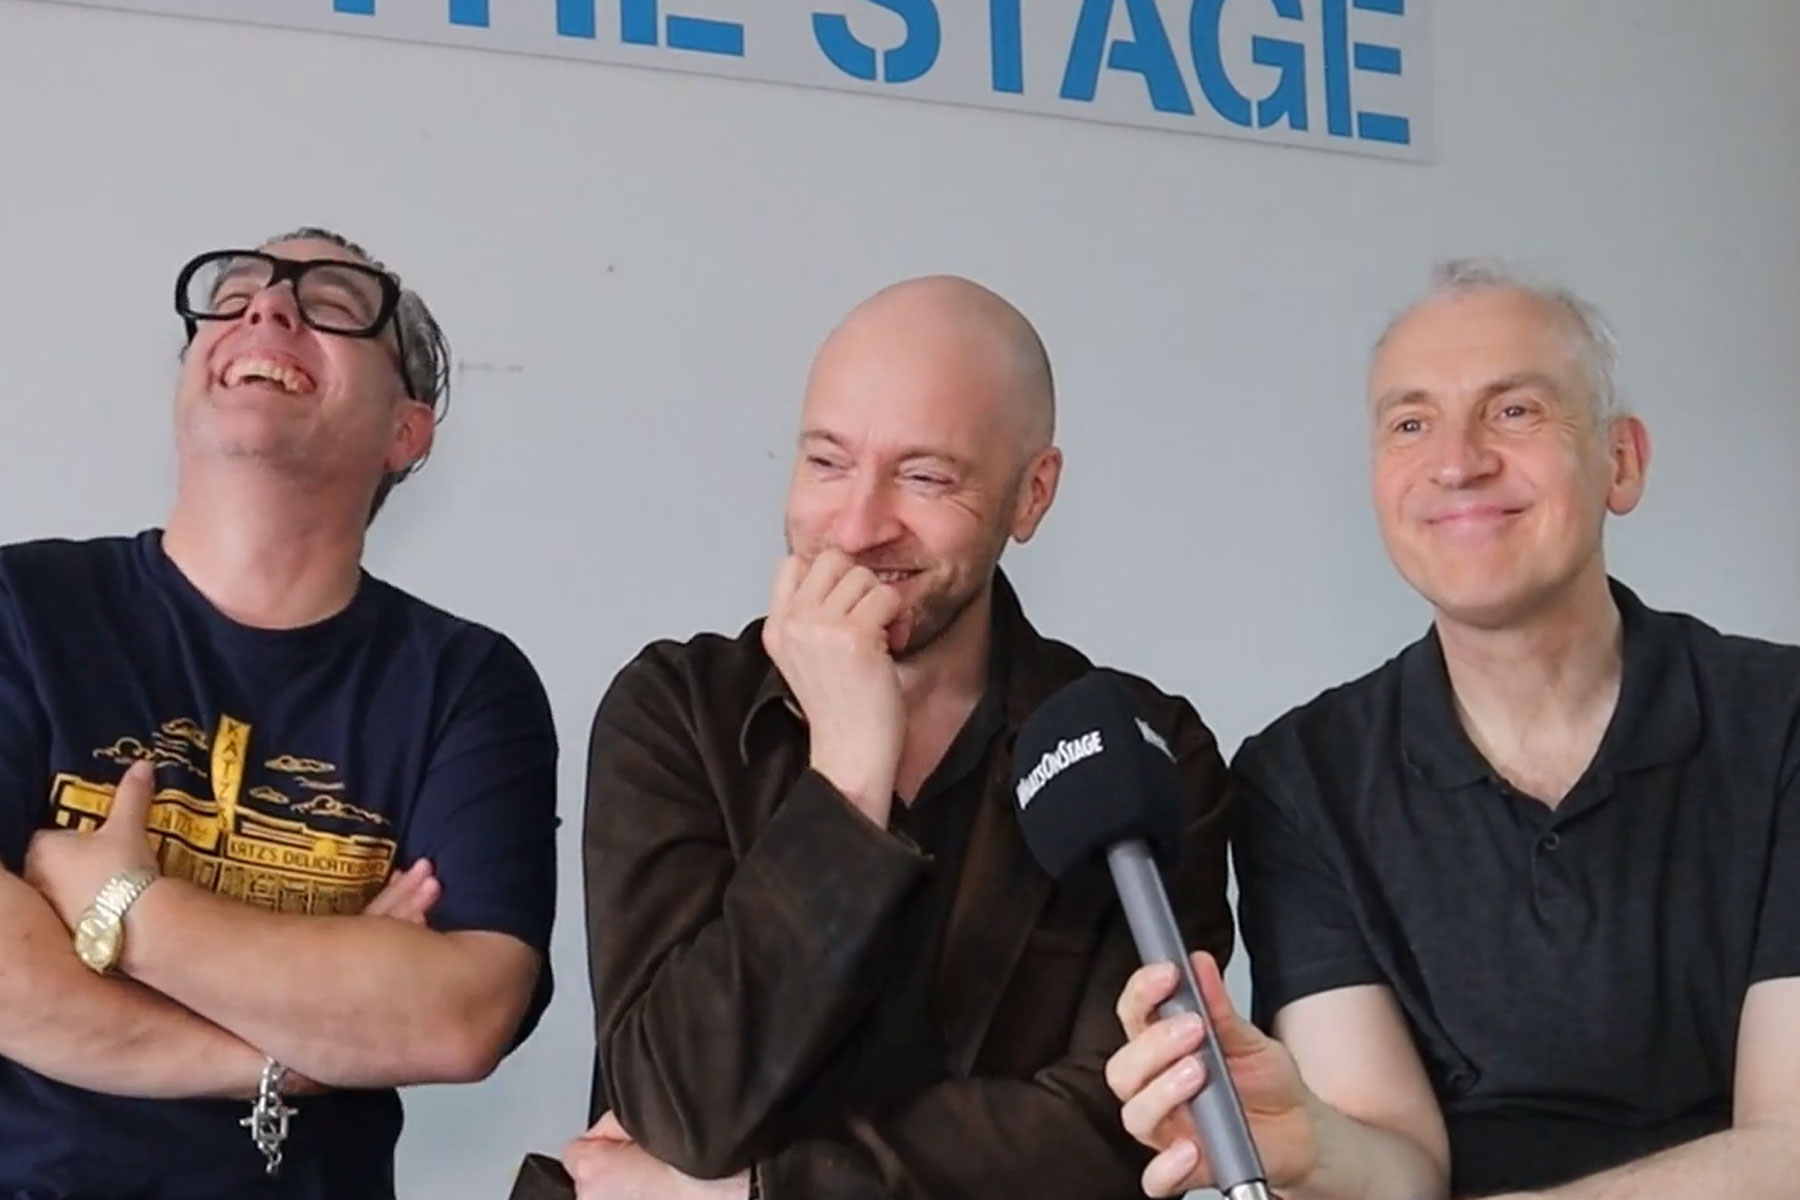 Andy Nyman, Derren Brown and Andrew O'Connor in interview